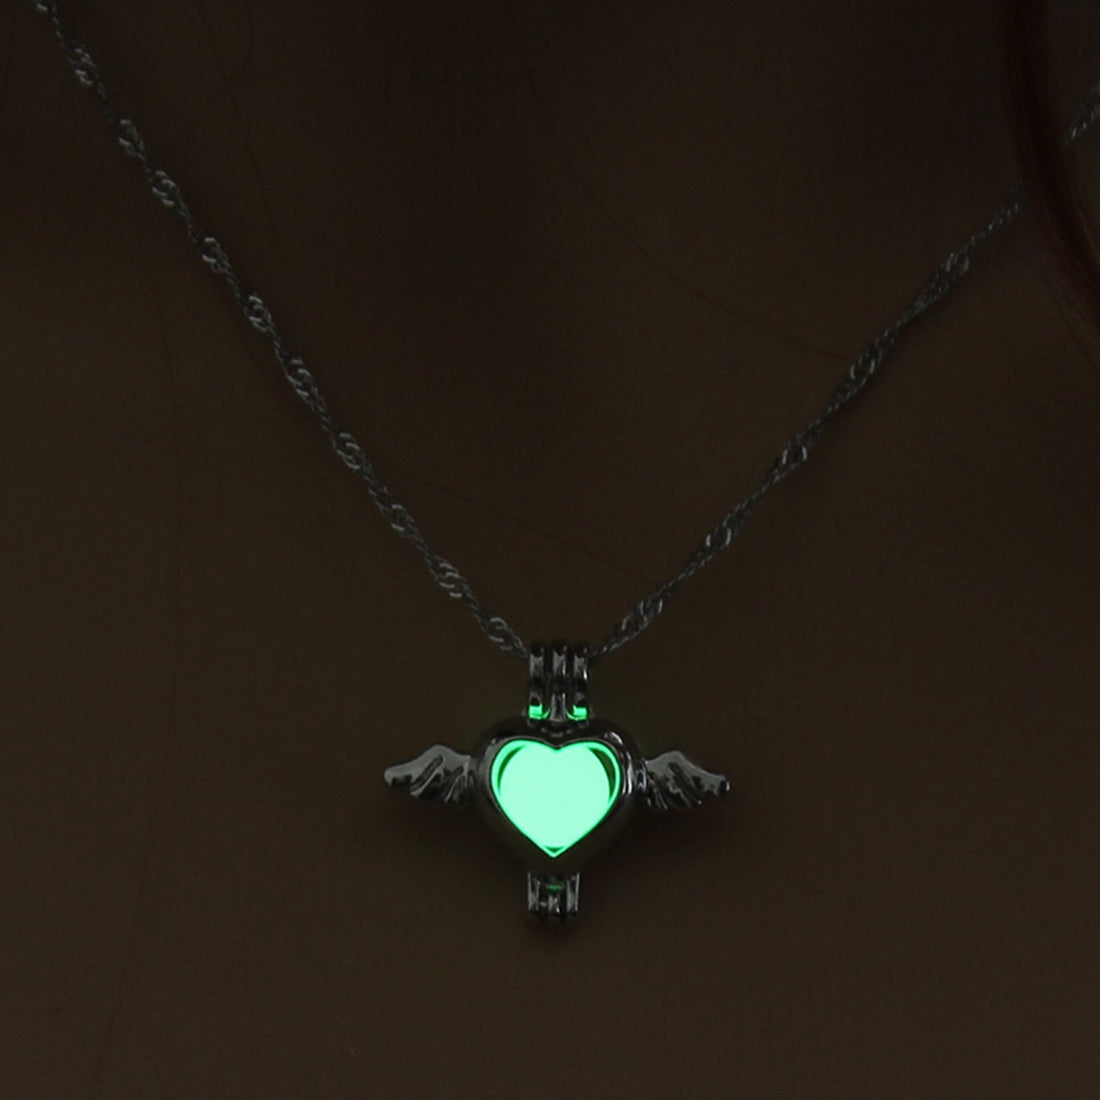 Vintage Silver Color Chain Glow in the Dark Night Jewelry Colorful Angel Wings Heart Pendant Necklace For Girlfriend Luminous